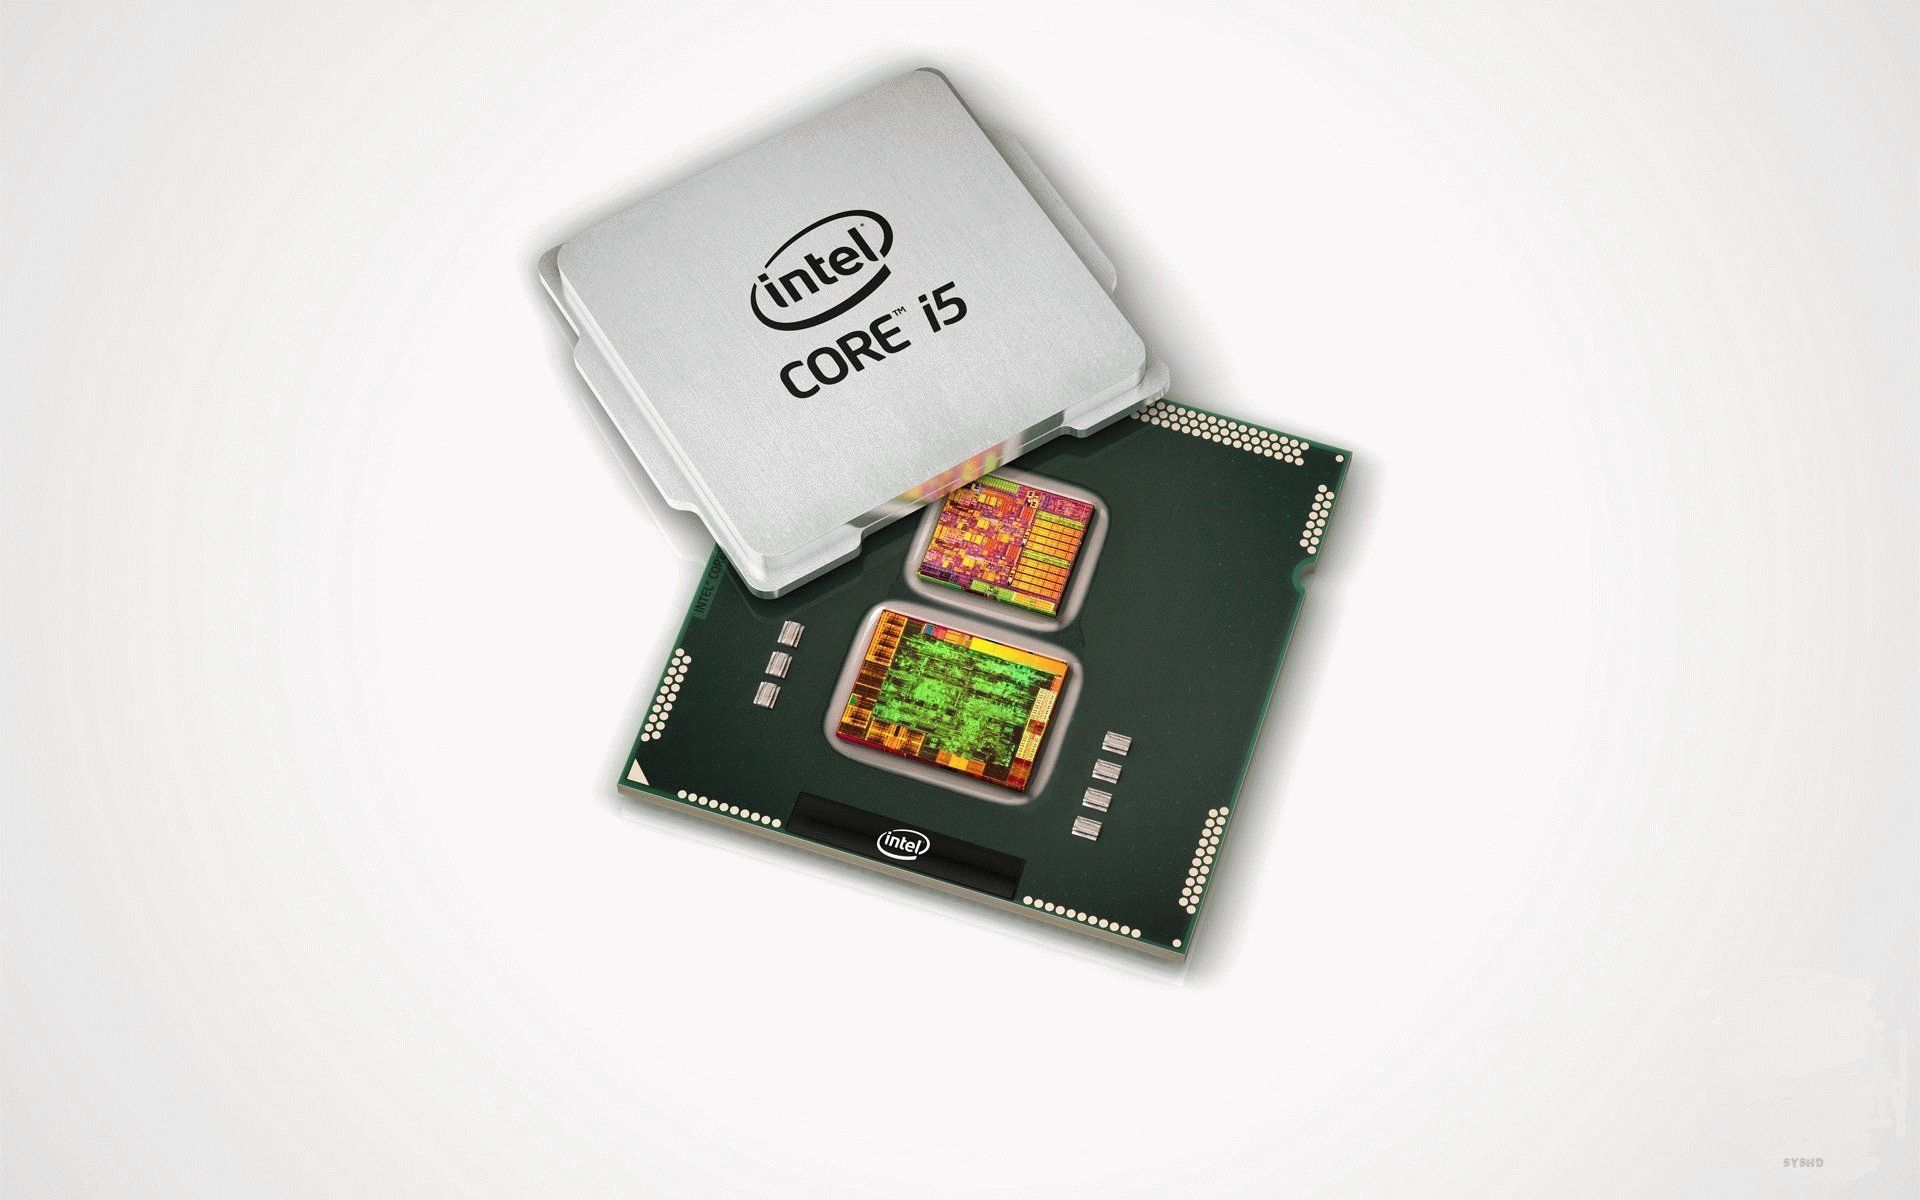 Best gaming processors in 2020